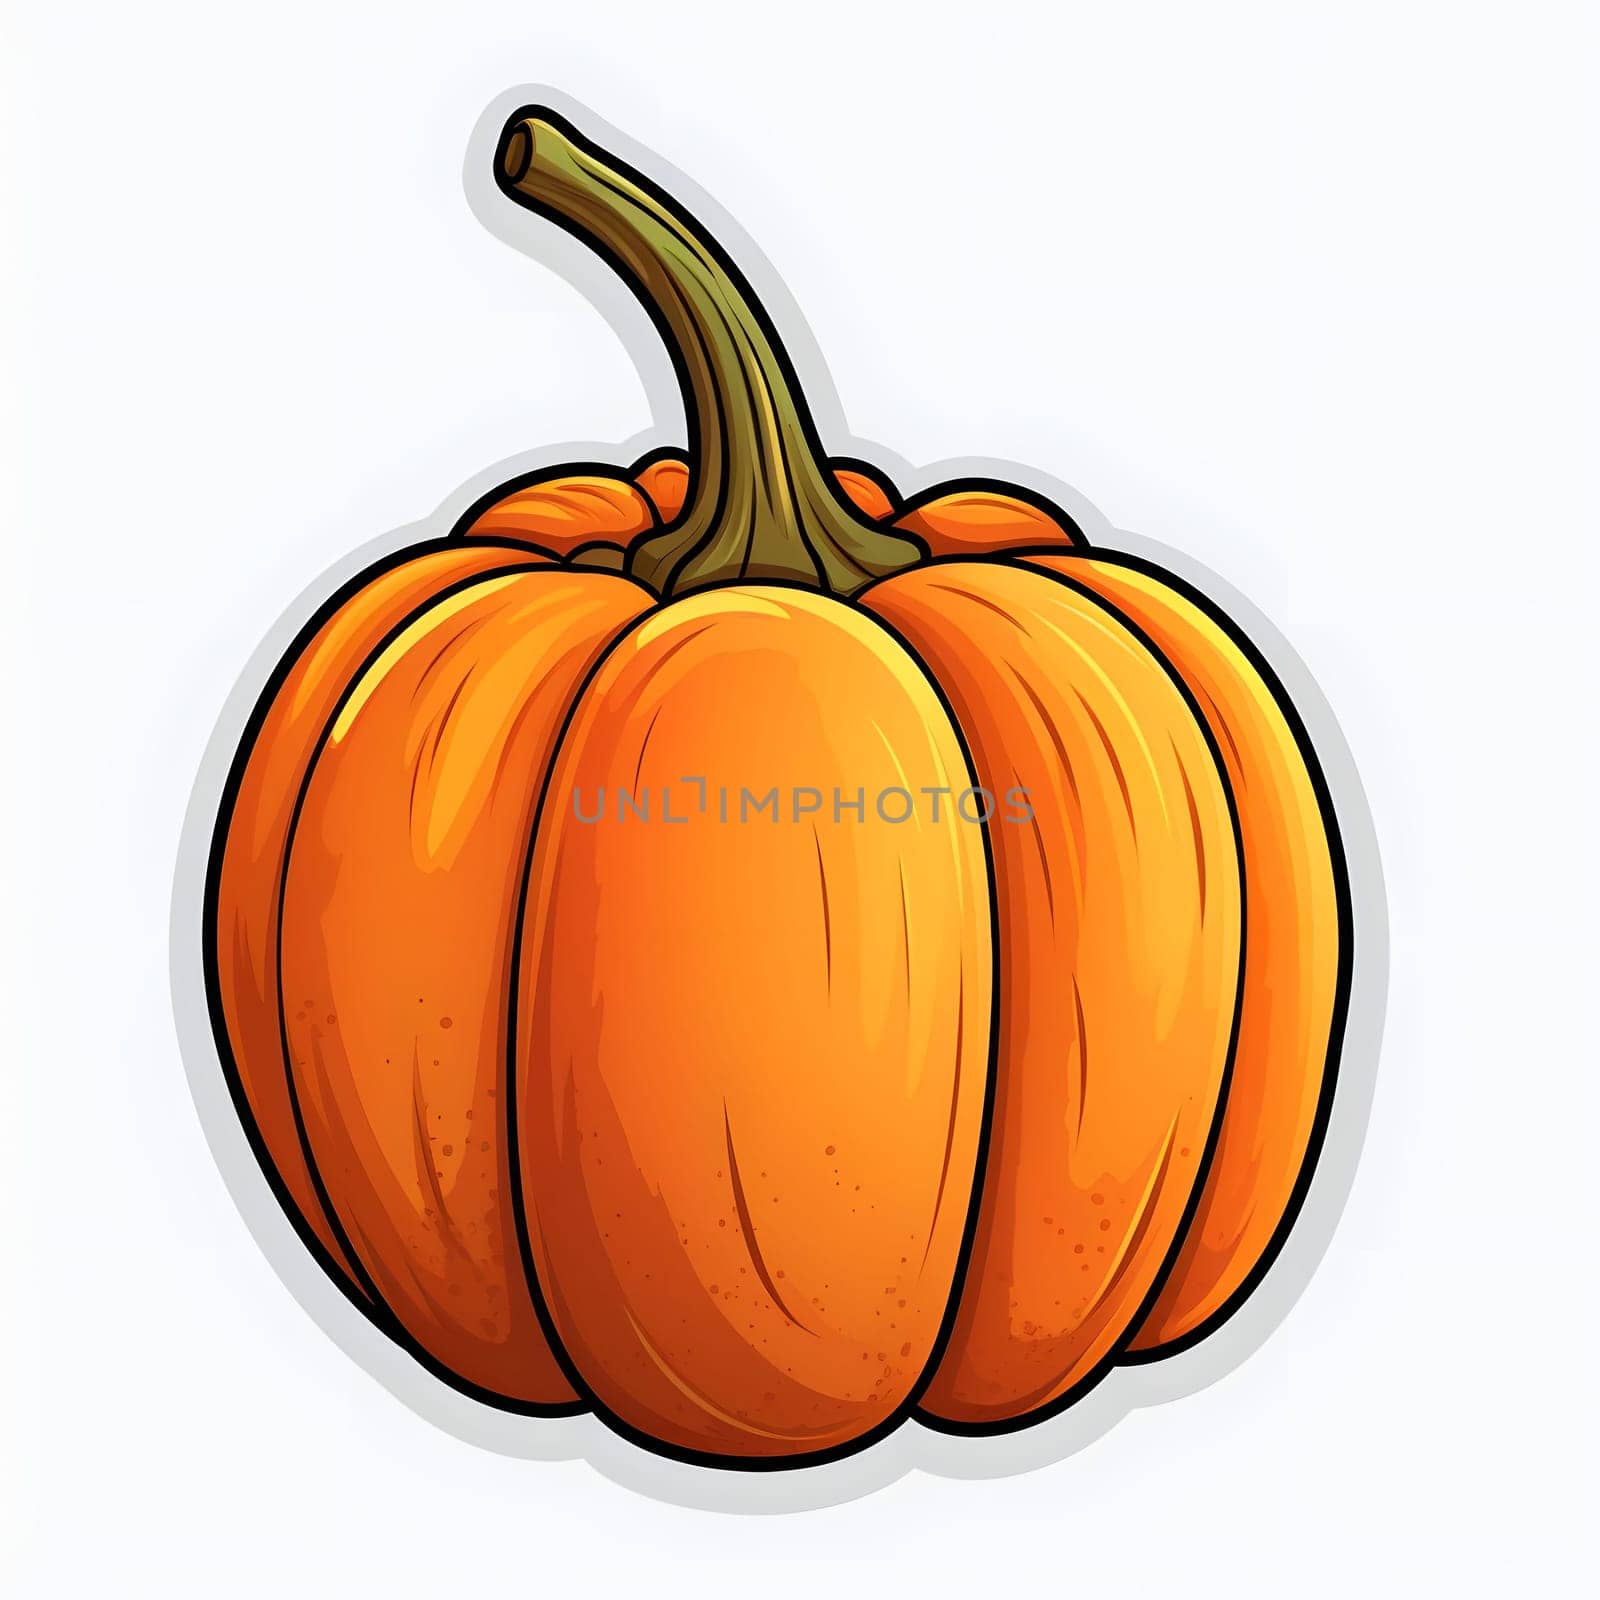 Pumpkin sticker. Pumpkin as a dish of thanksgiving for the harvest, picture on a white isolated background. by ThemesS